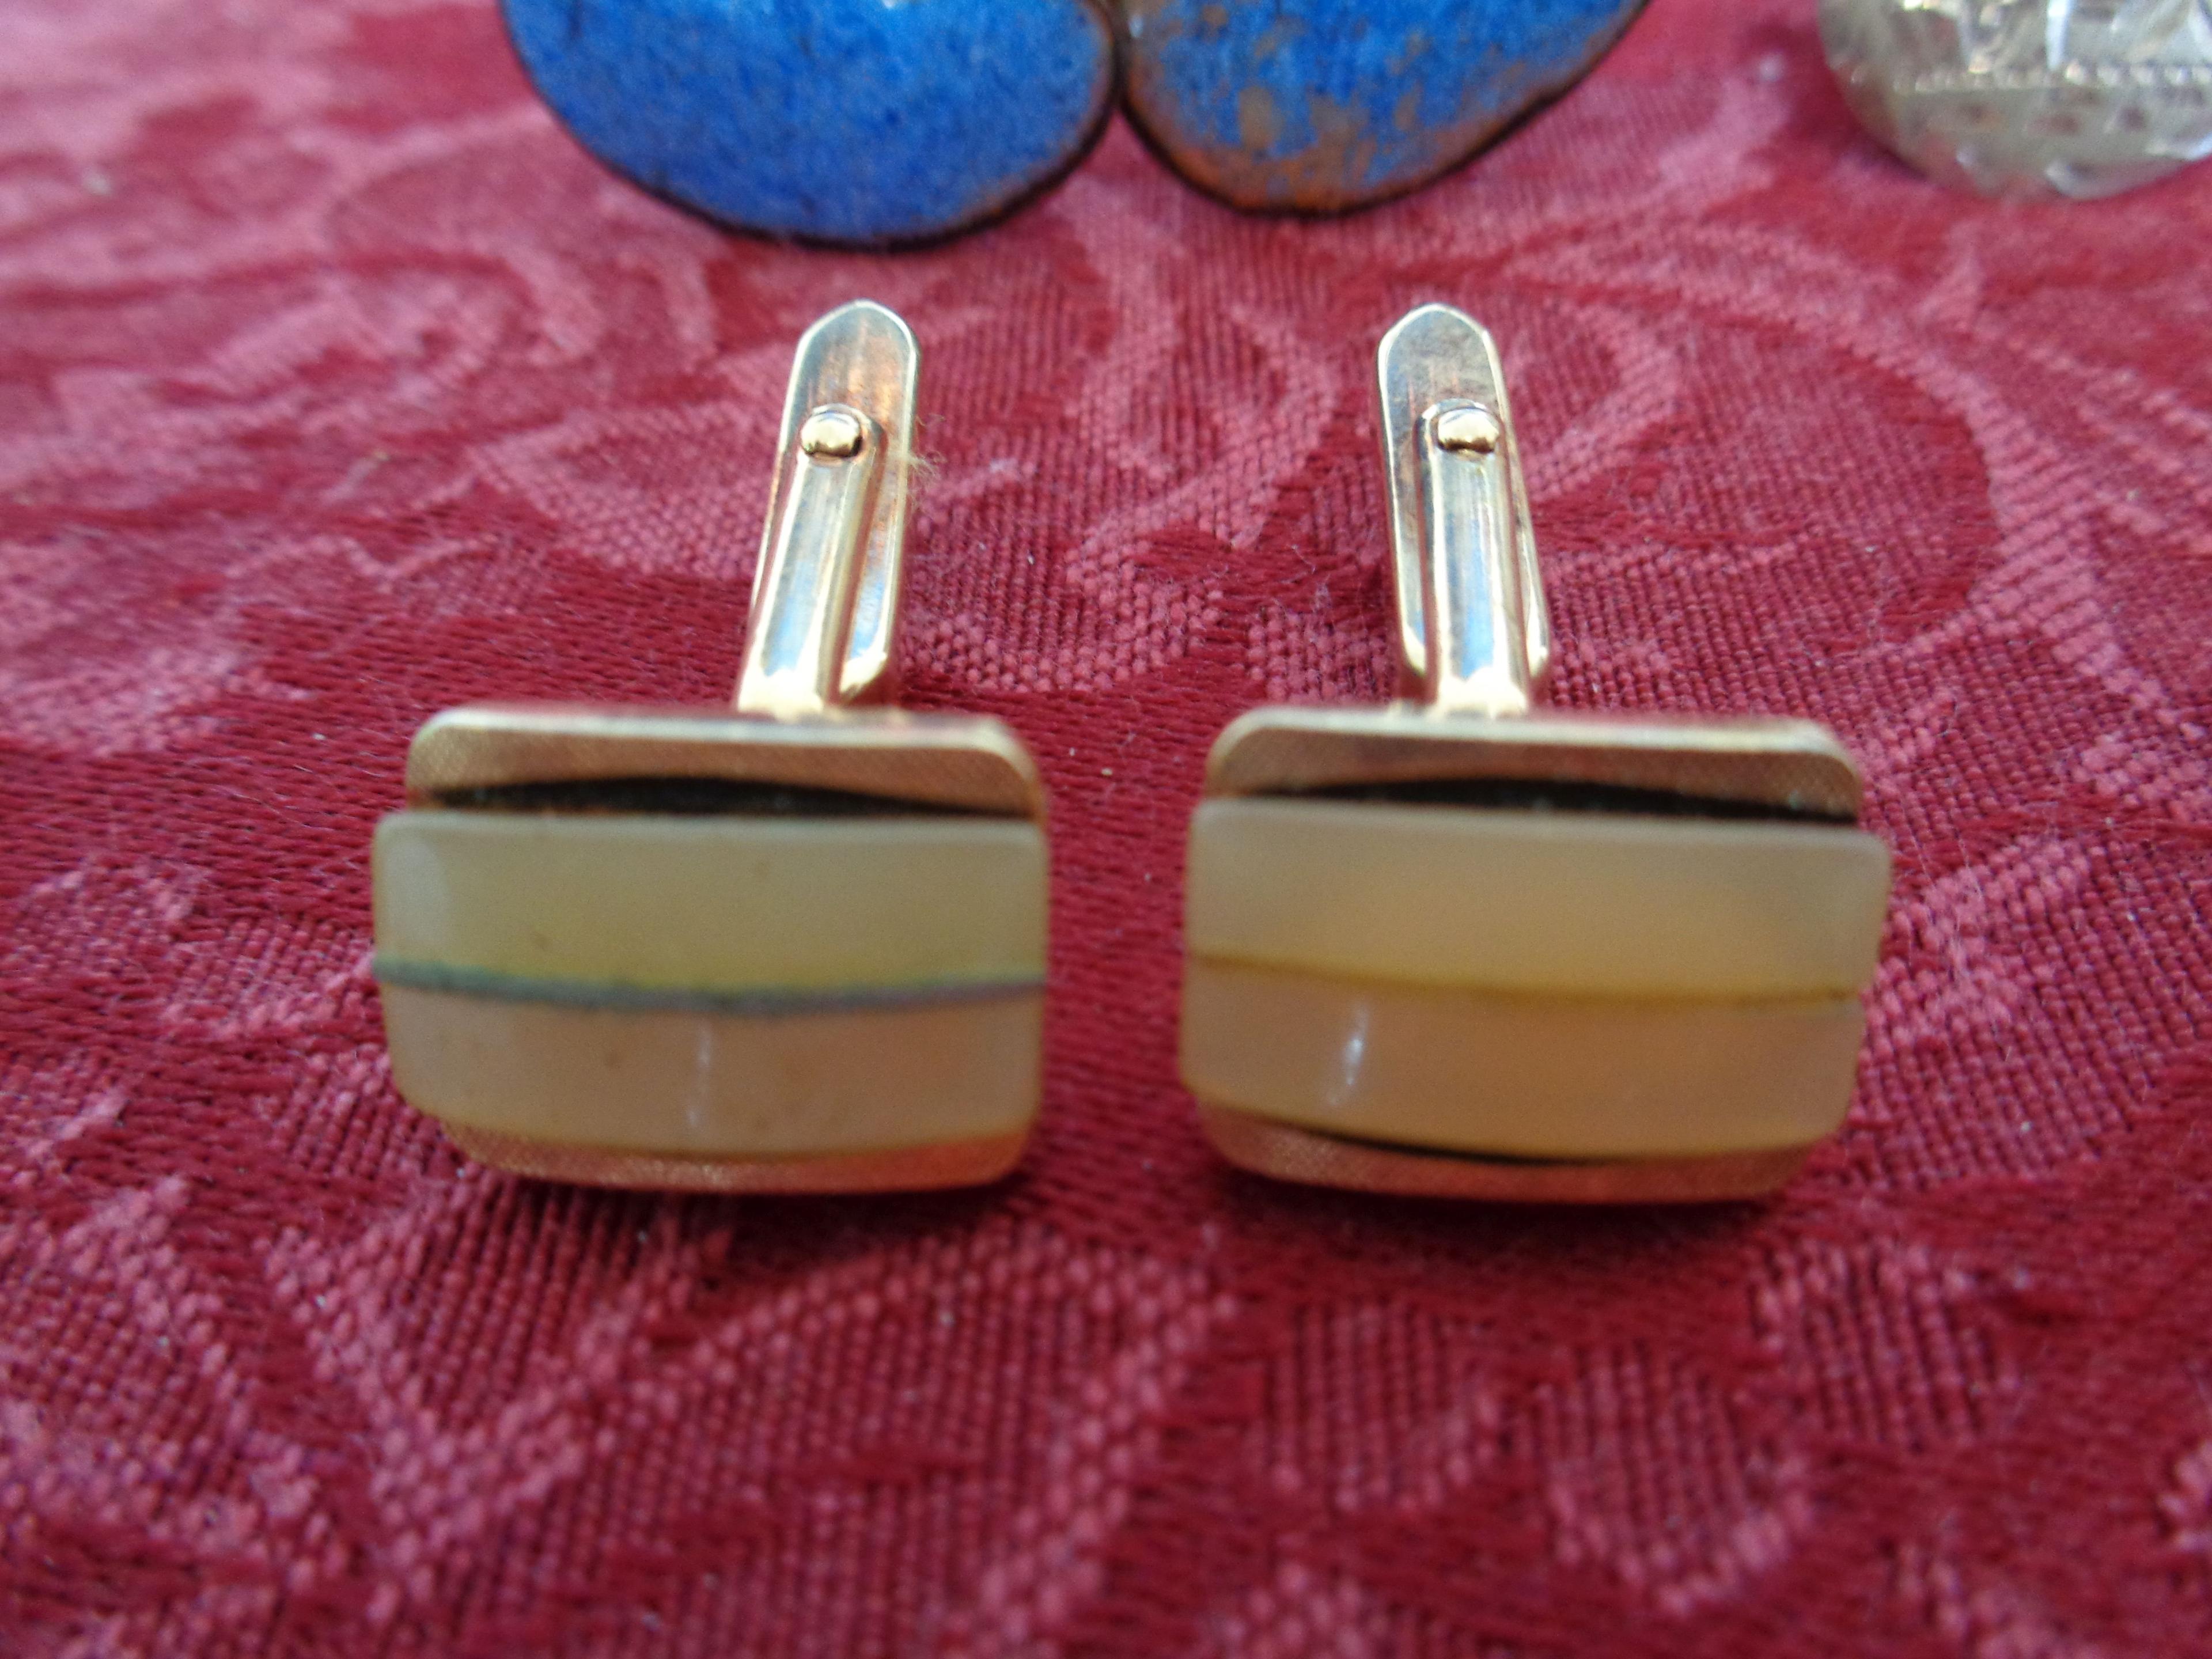 (4) Sets of Mens Cuff Links - Gold - Silver & Stone Style Cuff Links